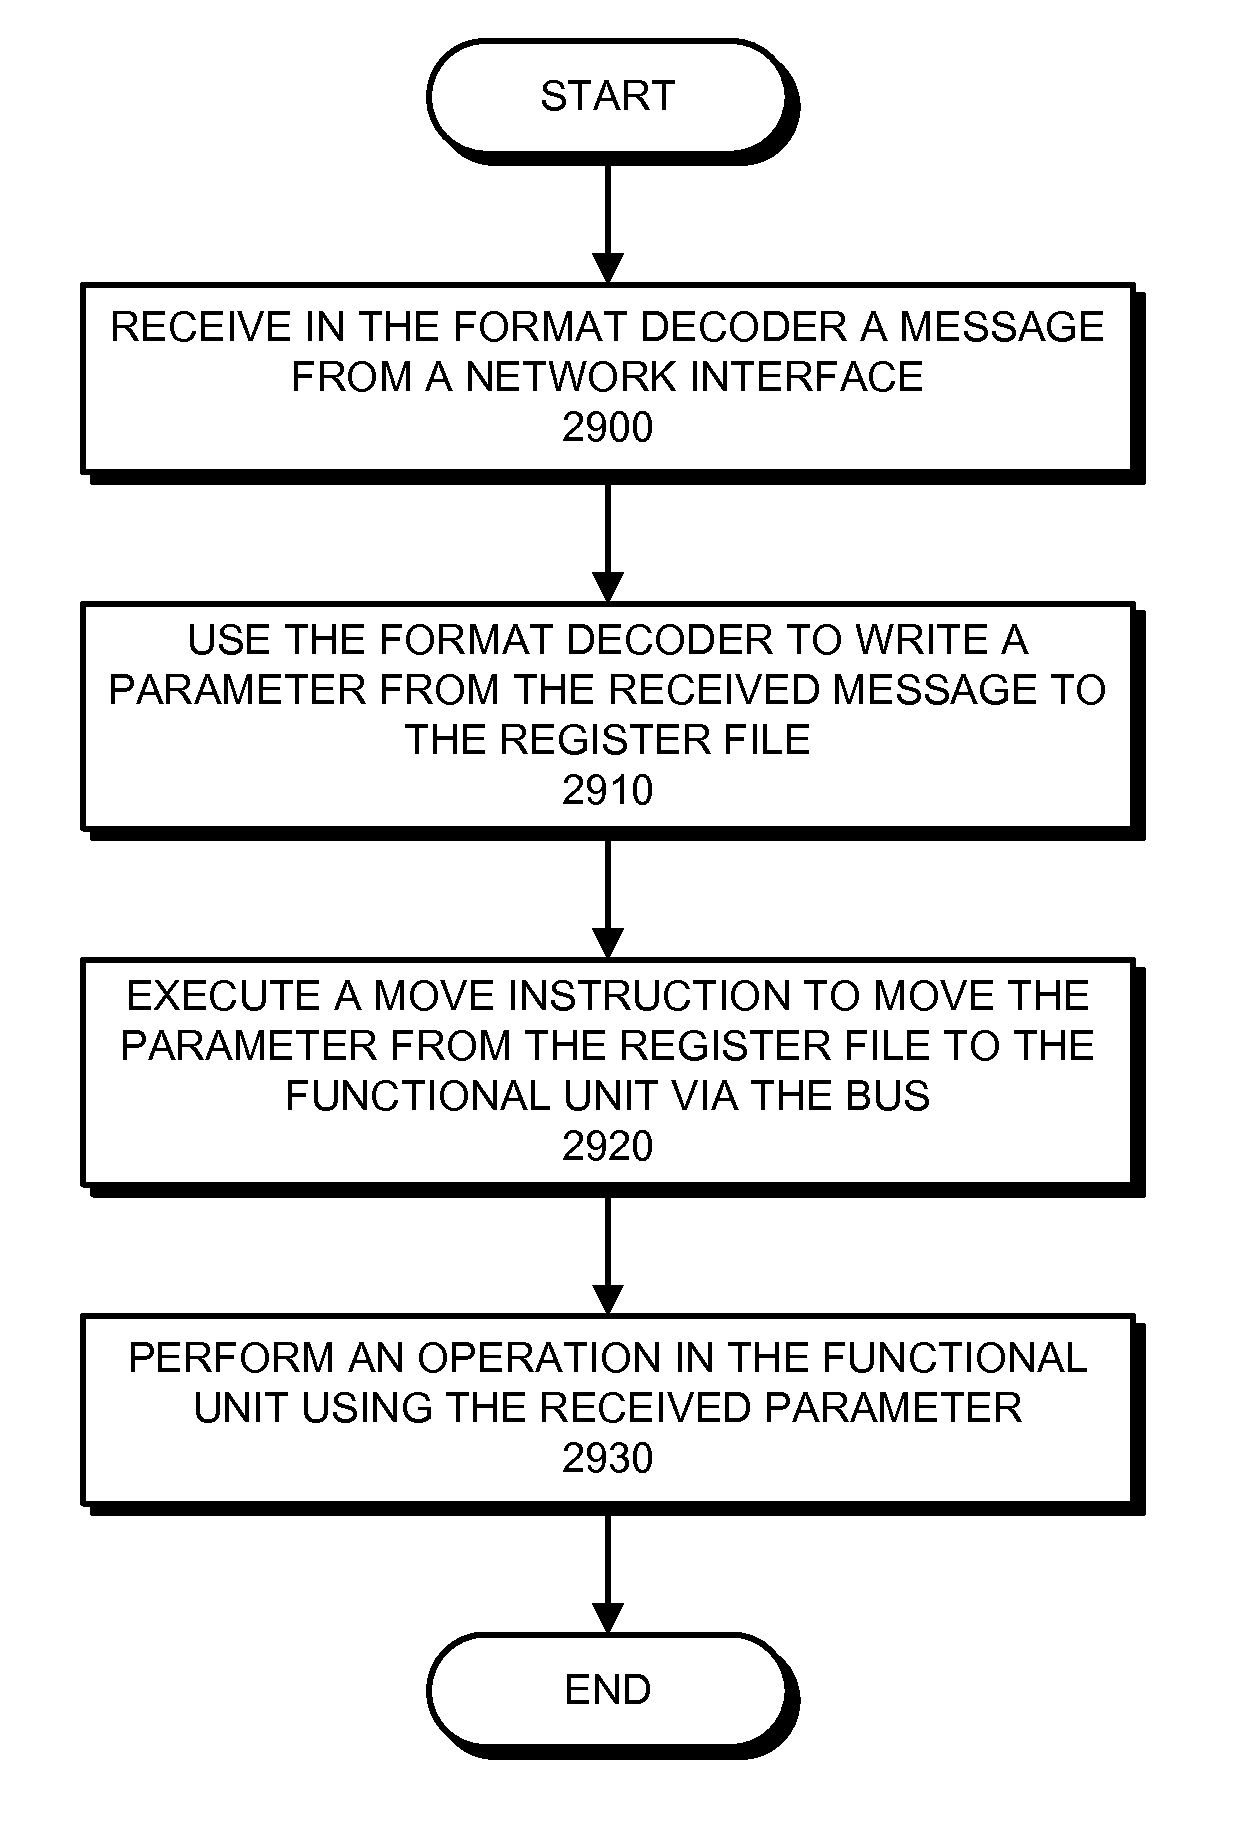 Using a single-instruction processor to process messages